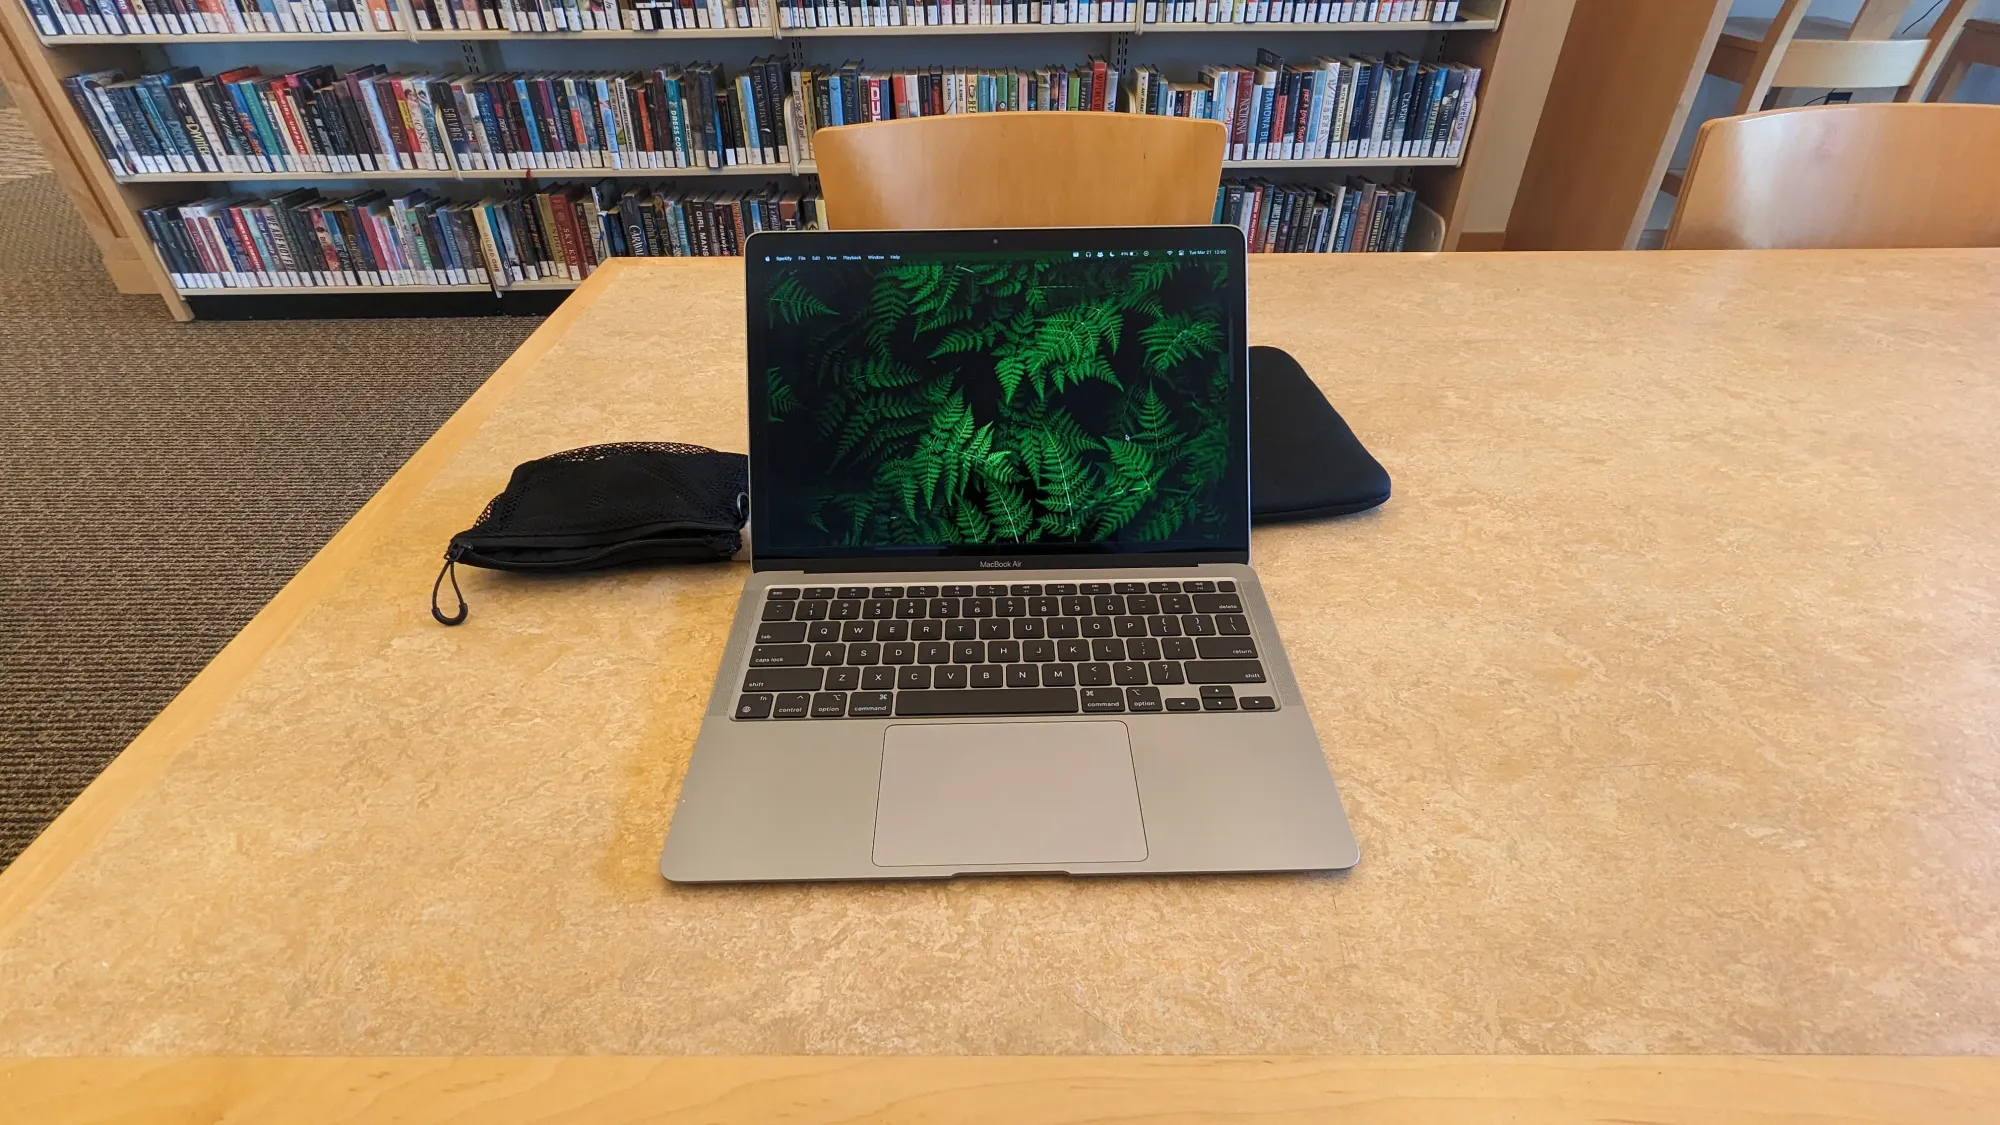 Working on a laptop at the library.